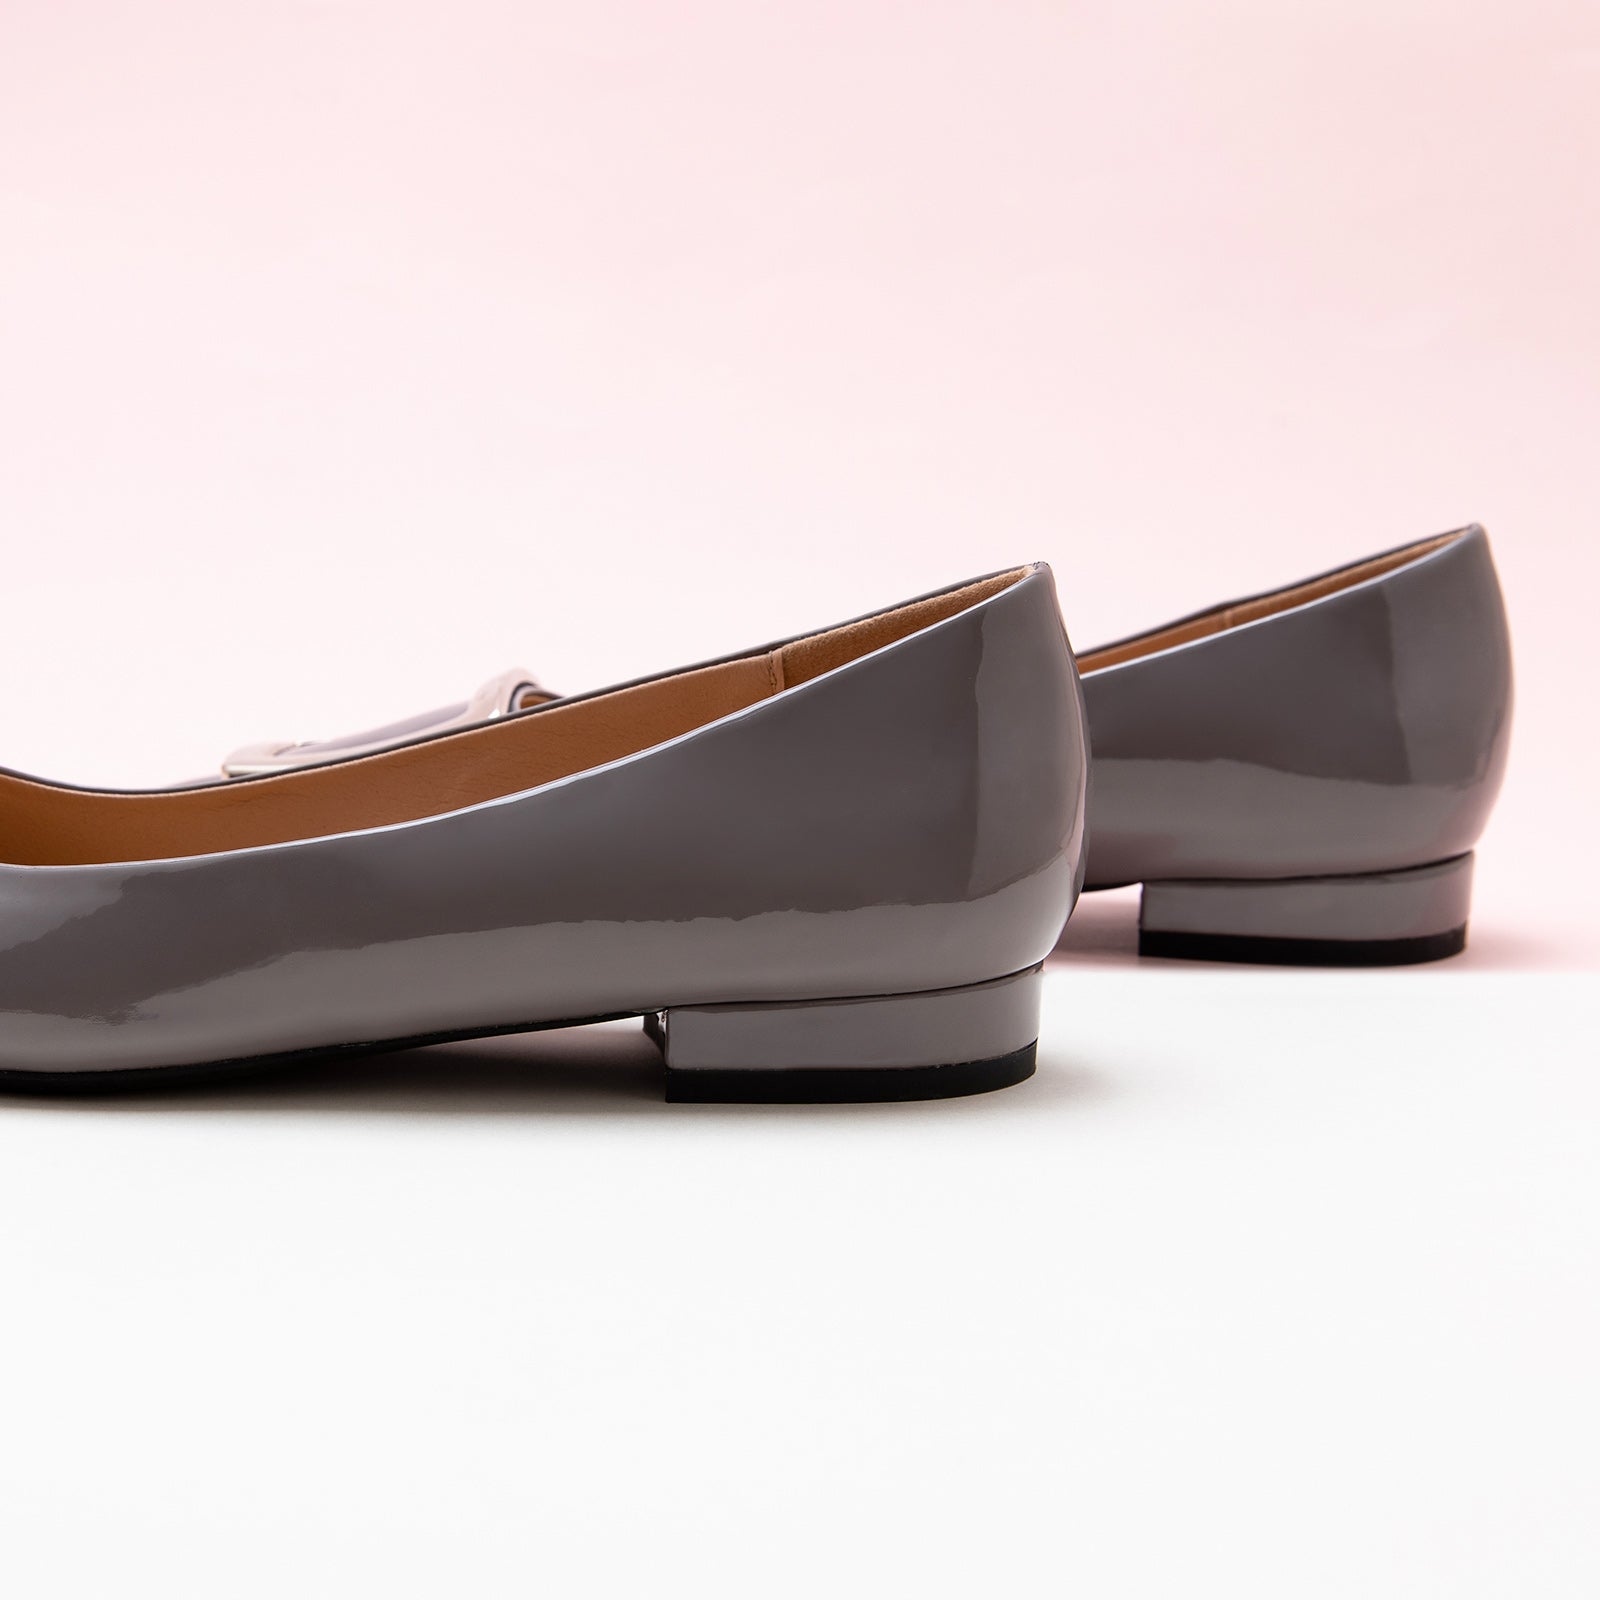 Grey Trapezoidal Buckle Flats, perfect for a confident and fashionable look in any urban setting